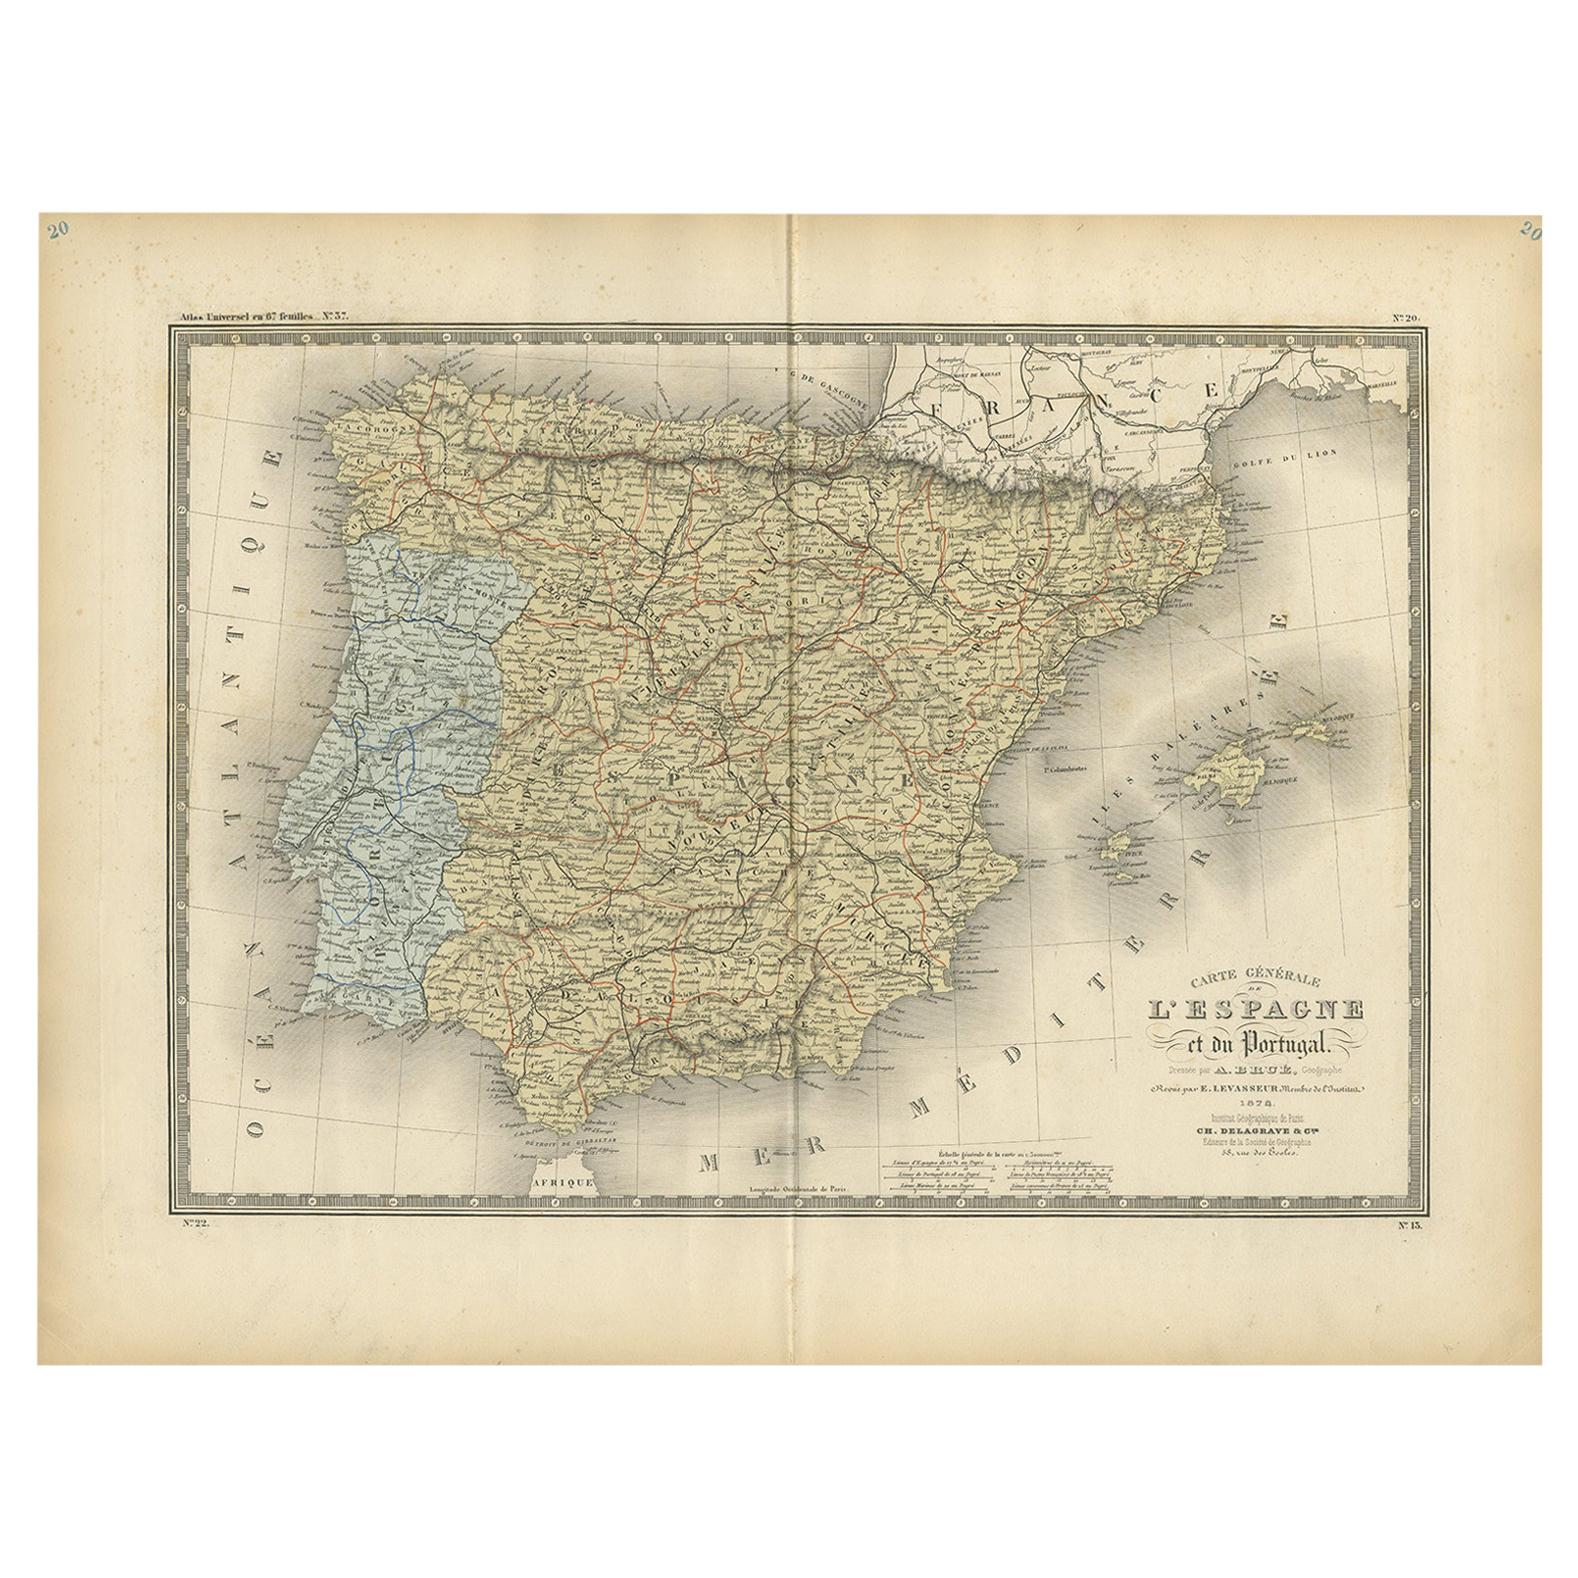 Antique Map of Spain and Portugal by Levasseur, '1875'